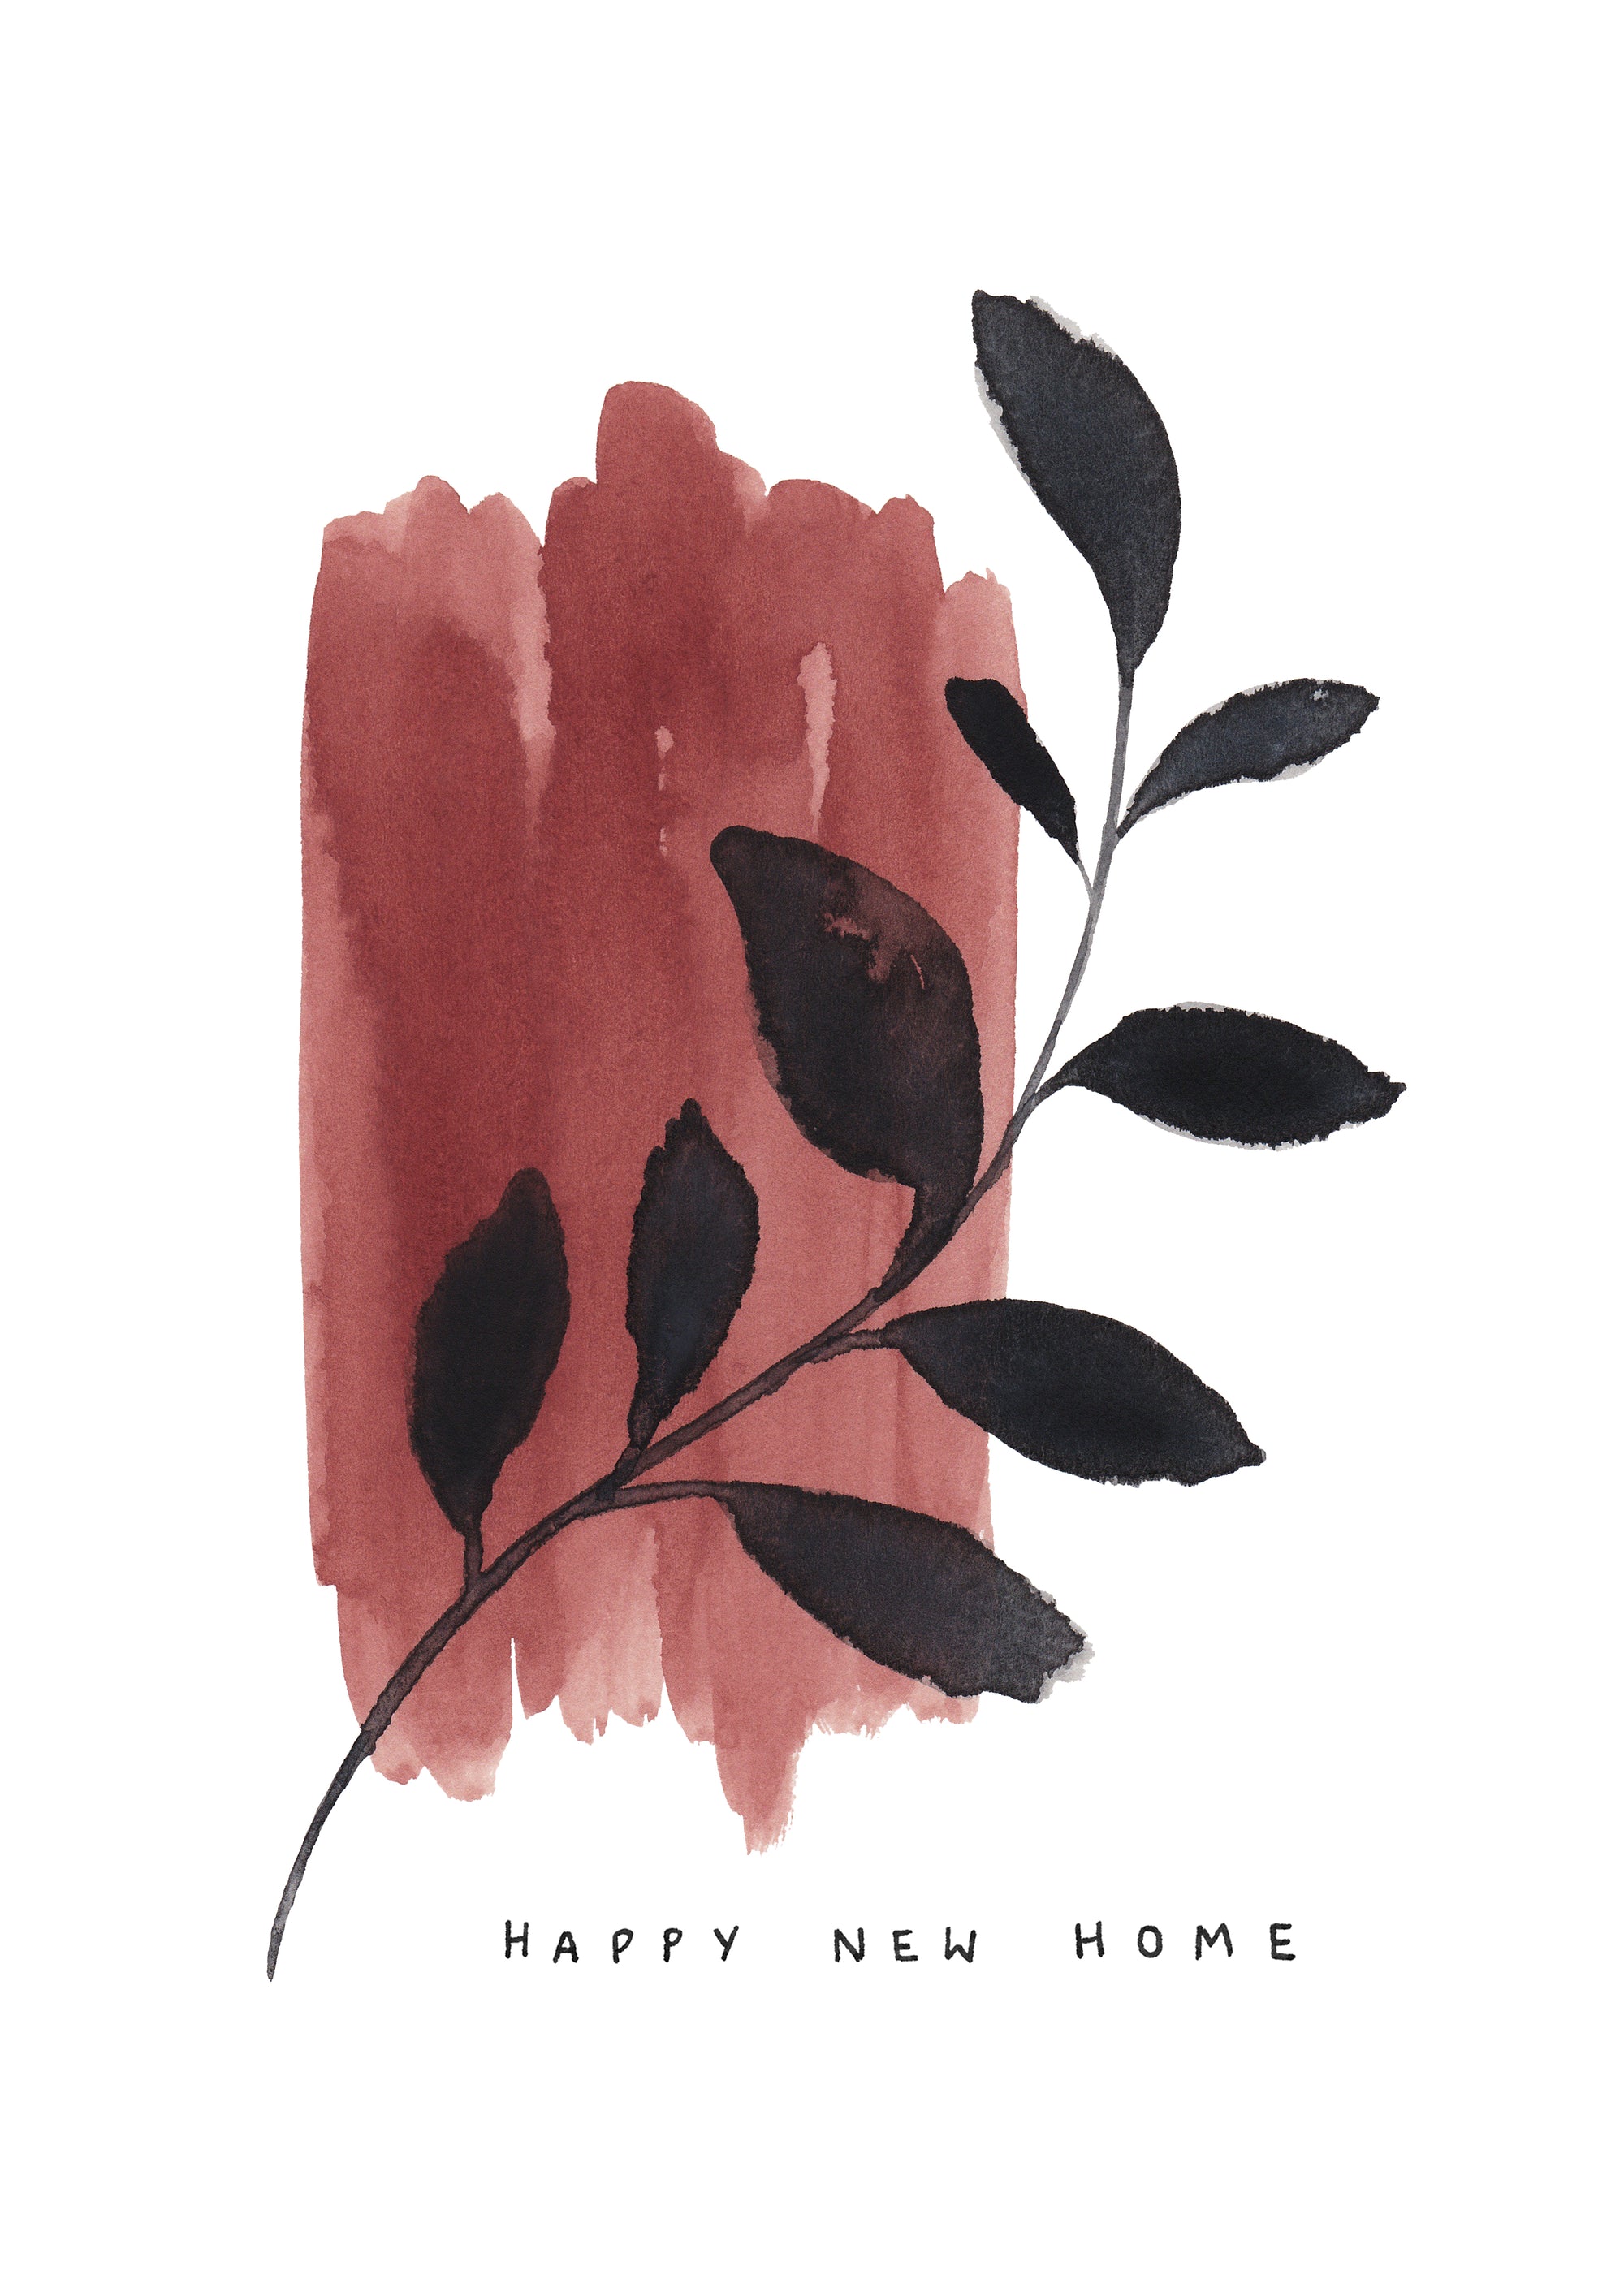 Leaf New Home Autumn Abstract Card by joy jen at penny black